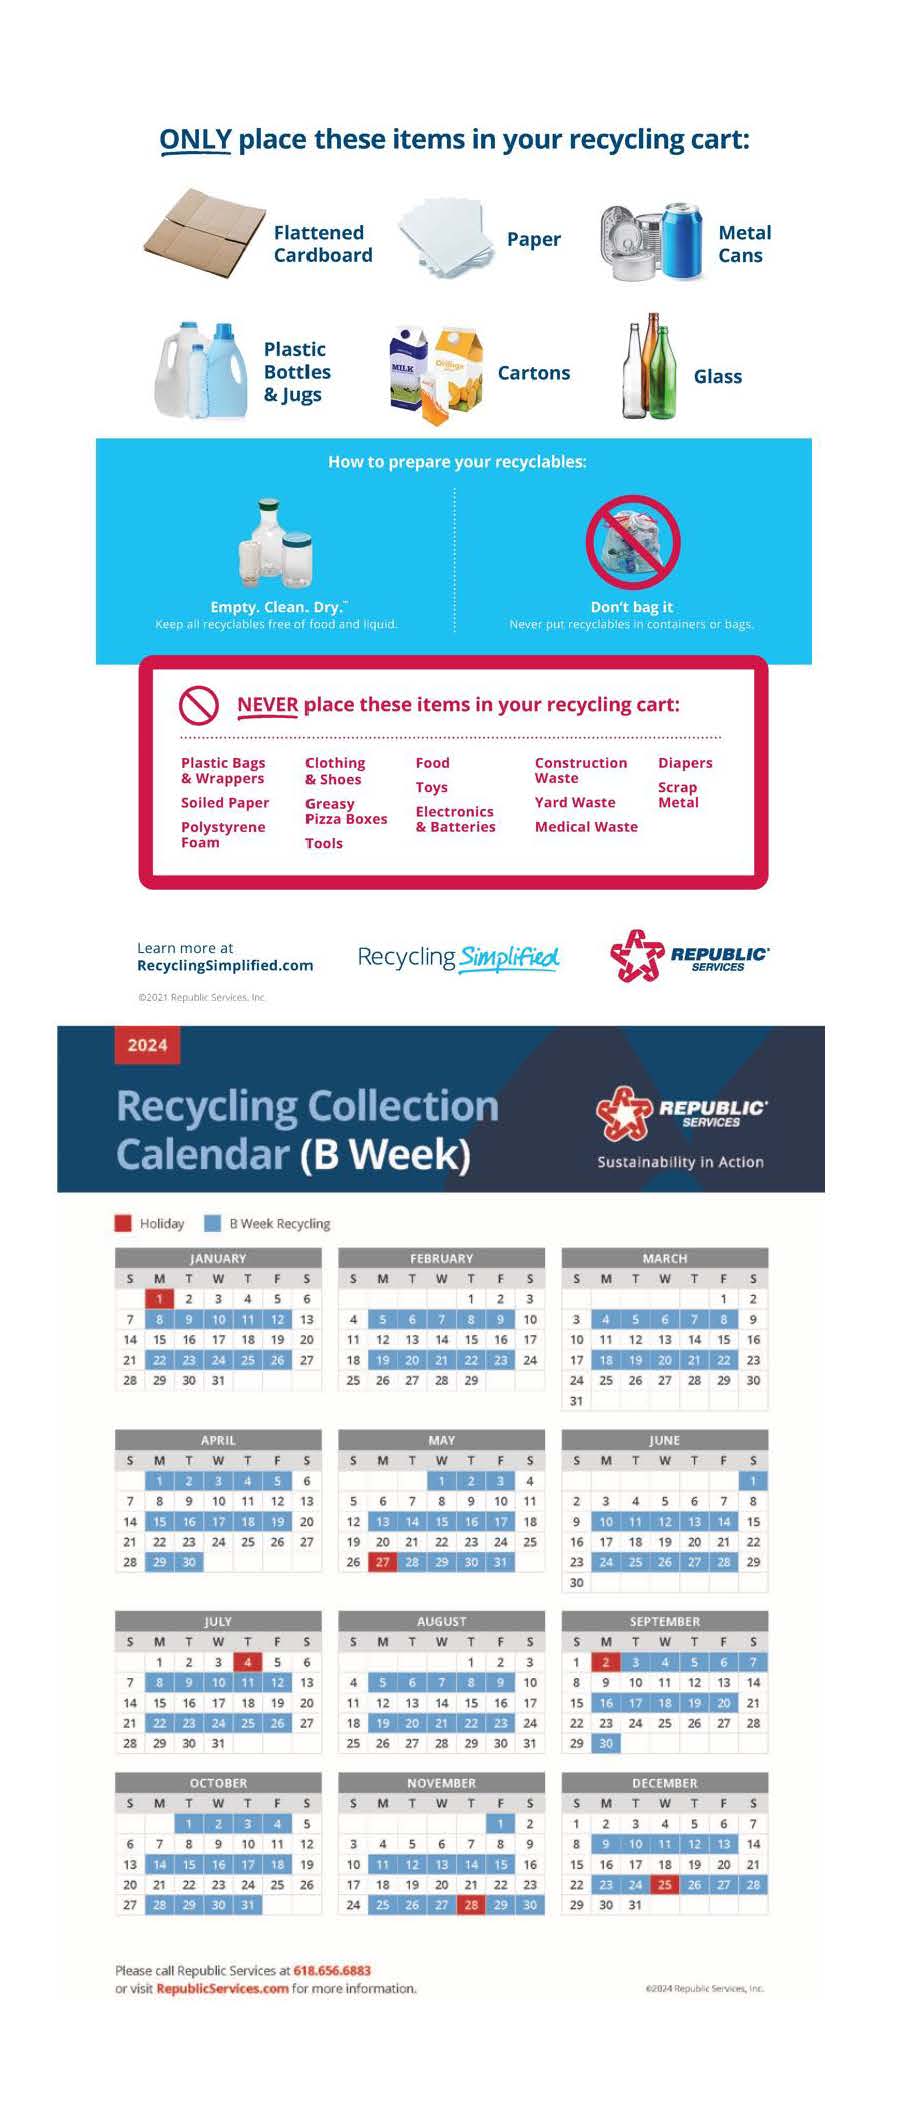 recycle items and schedule